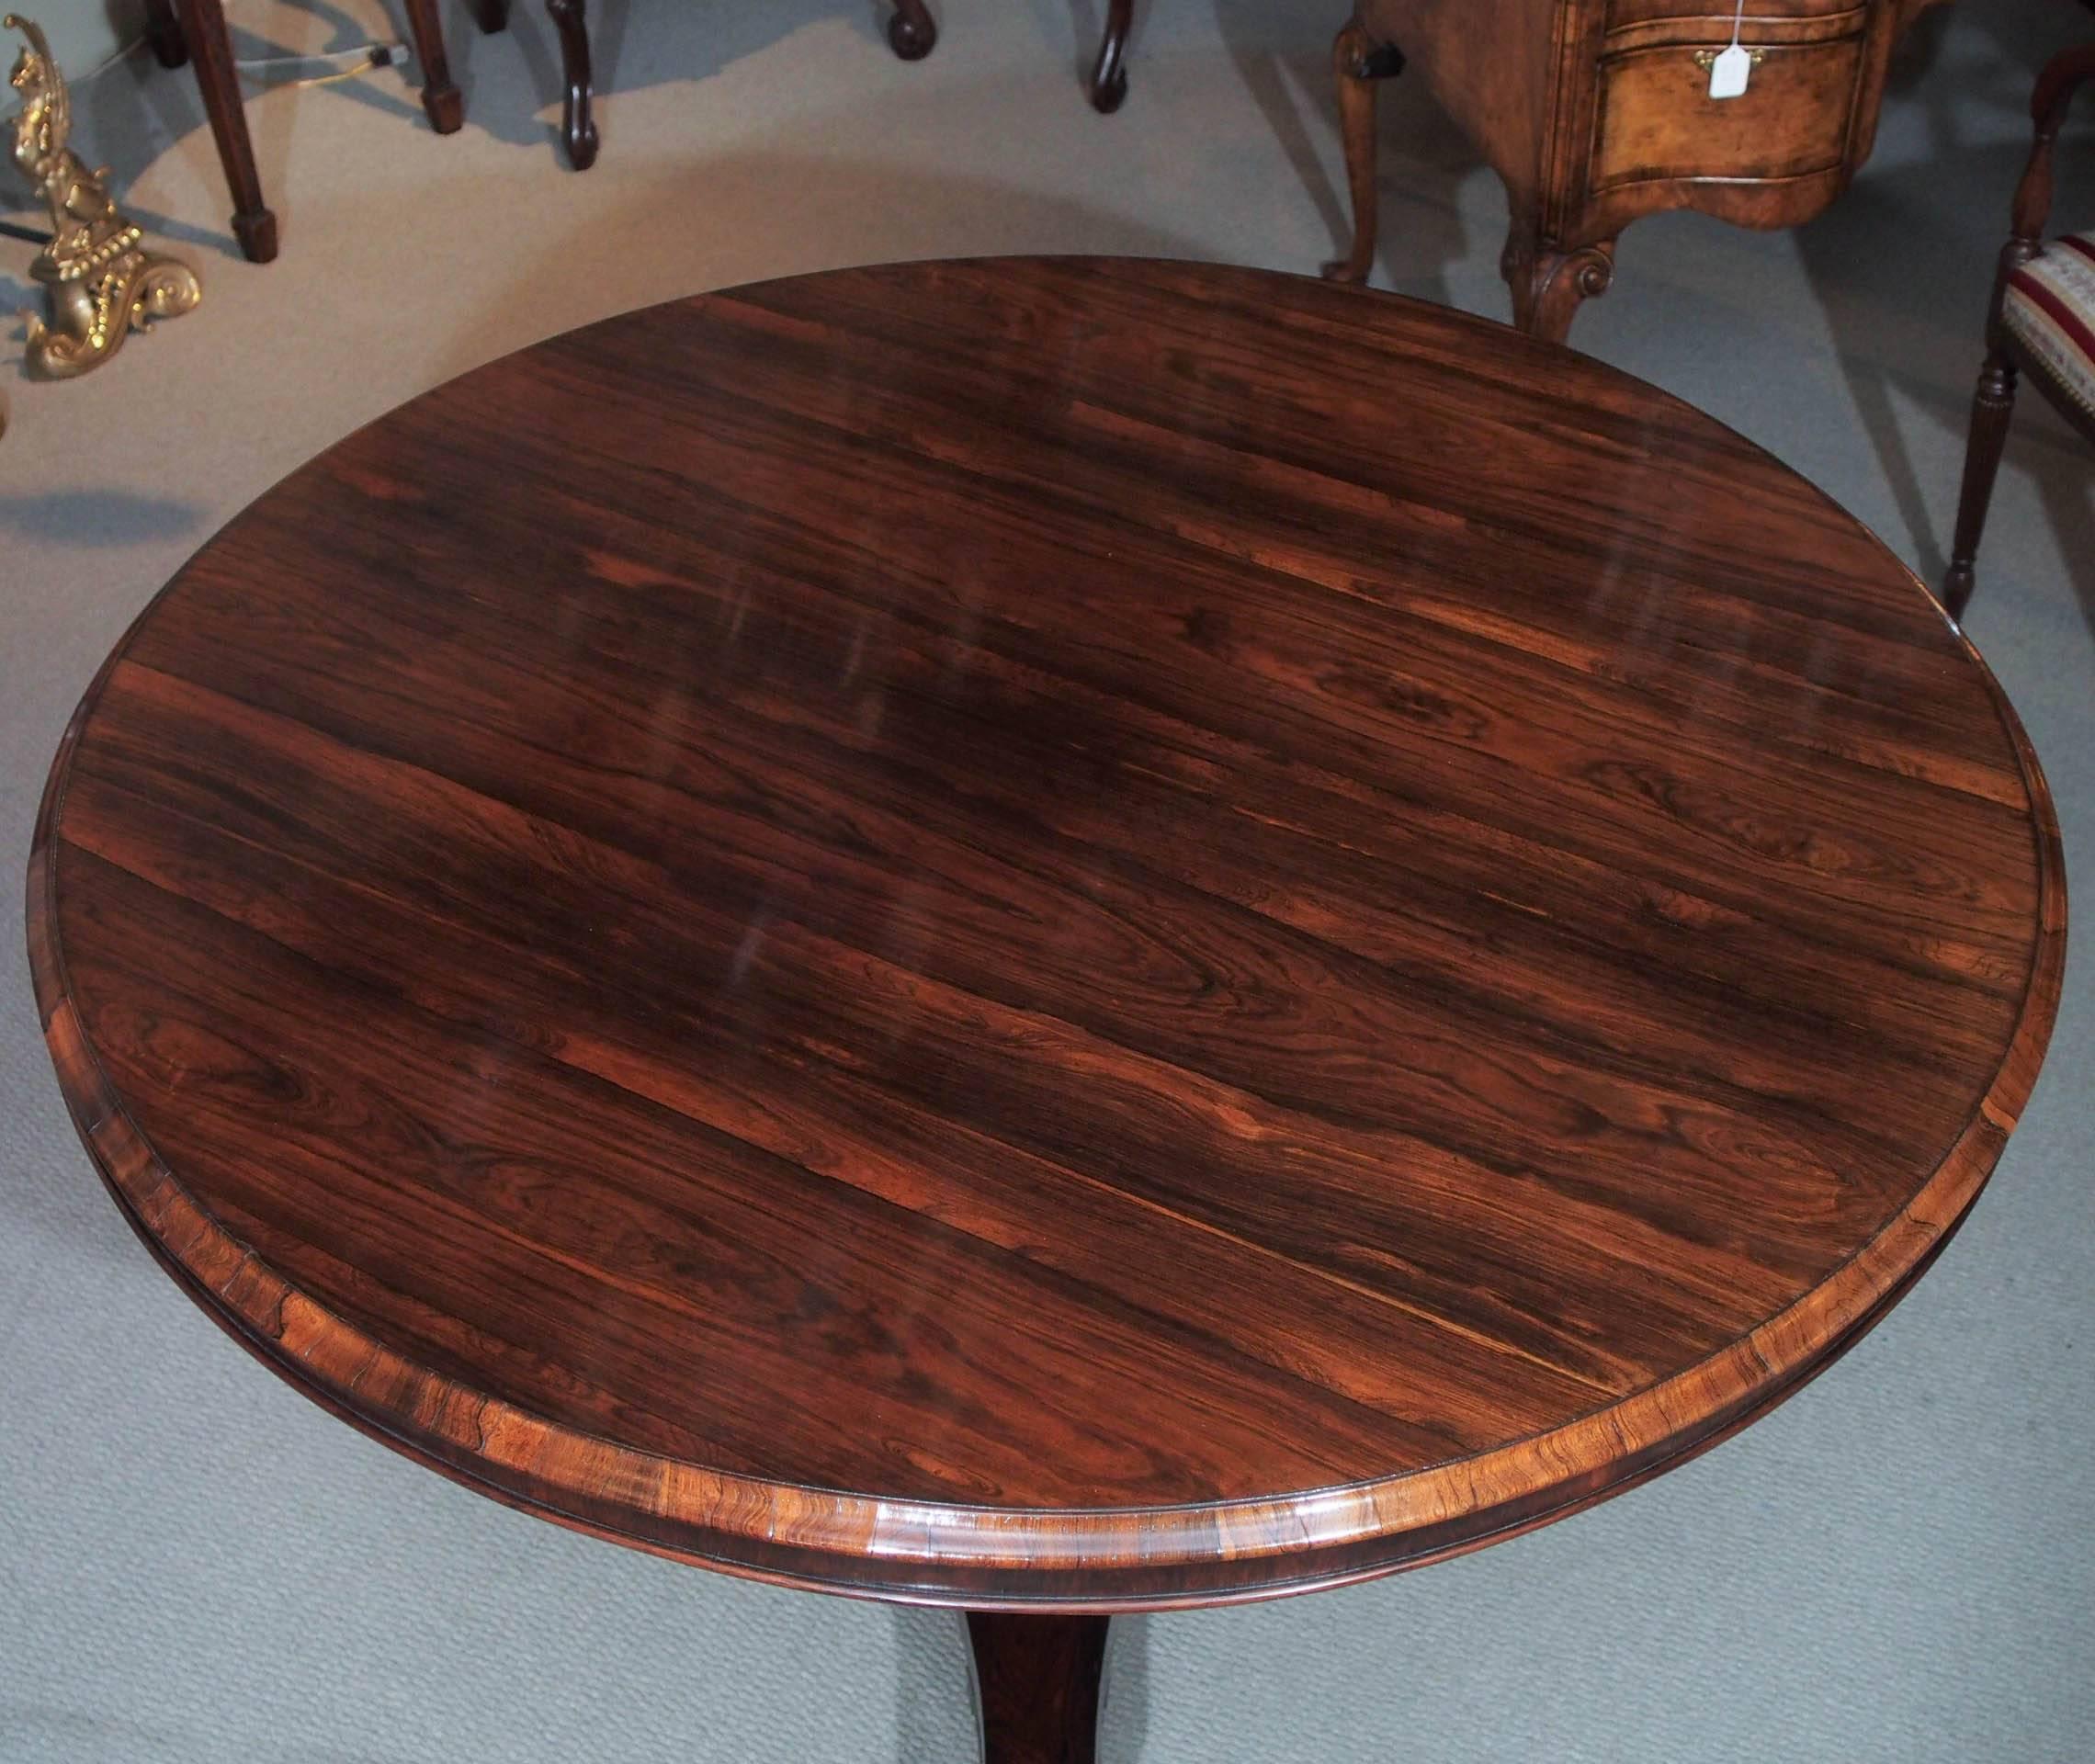 19th century English Regency rosewood centre table on pedestal base.